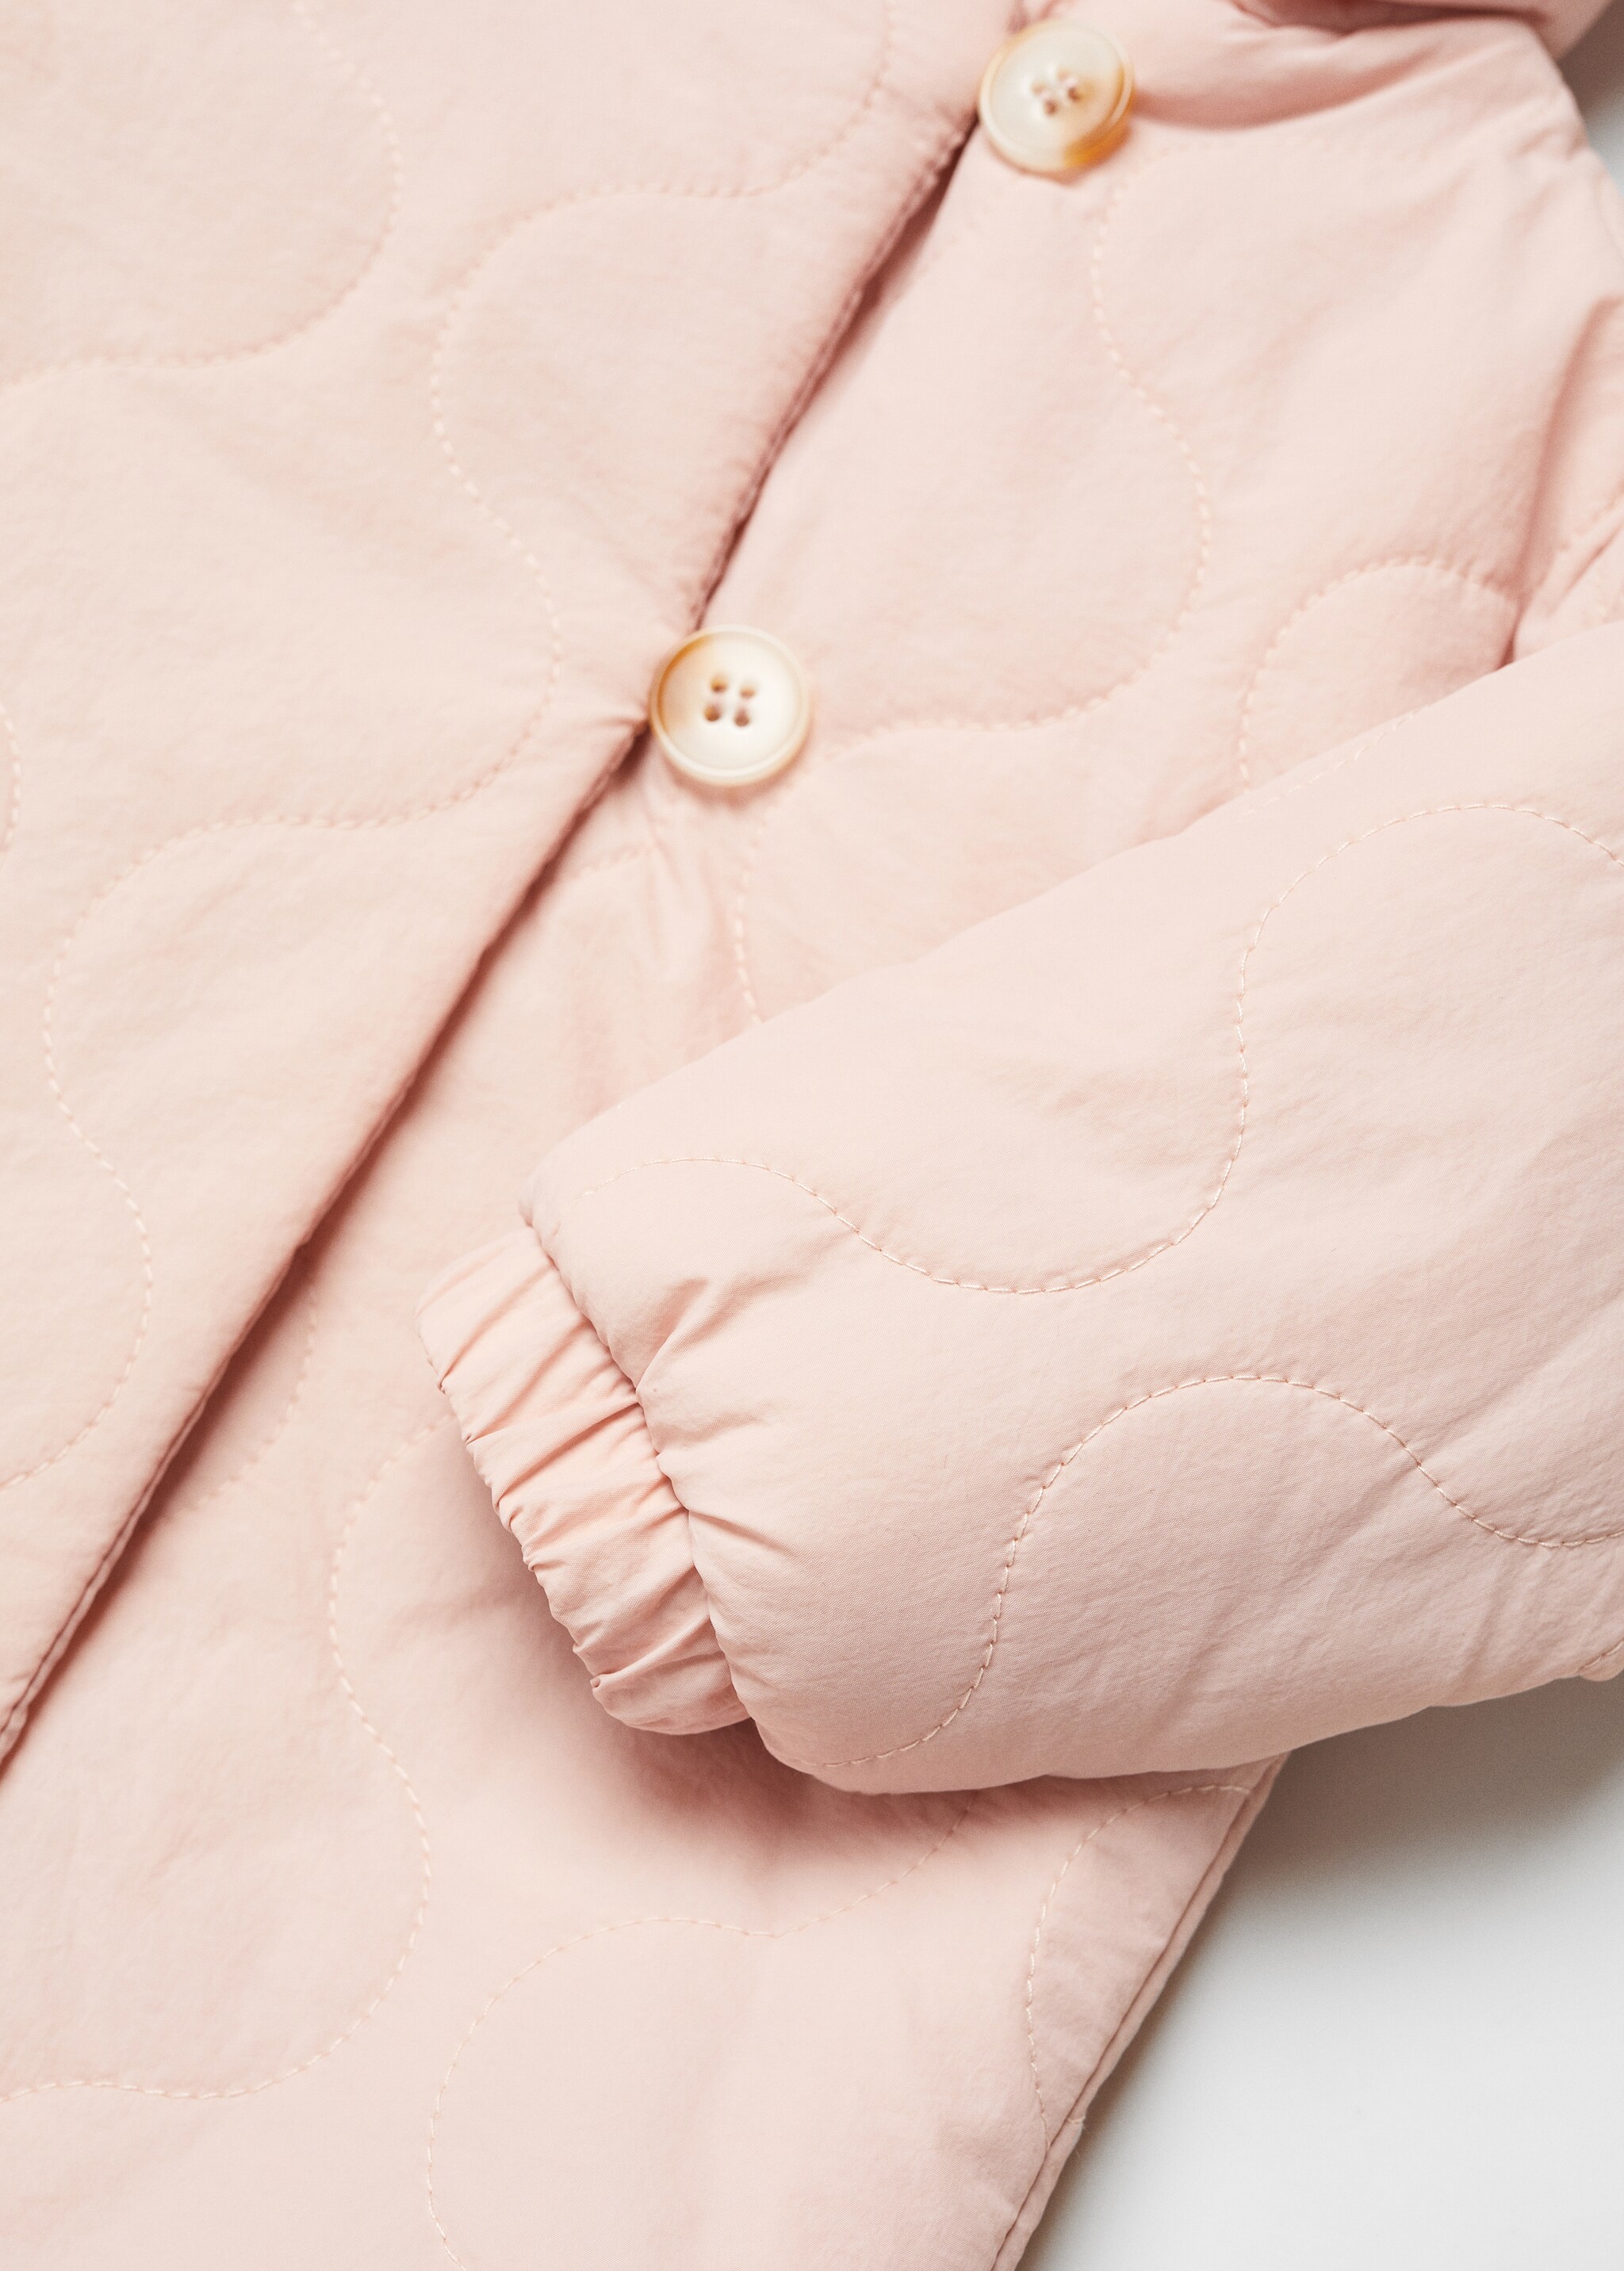 Quilted jacket - Details of the article 8